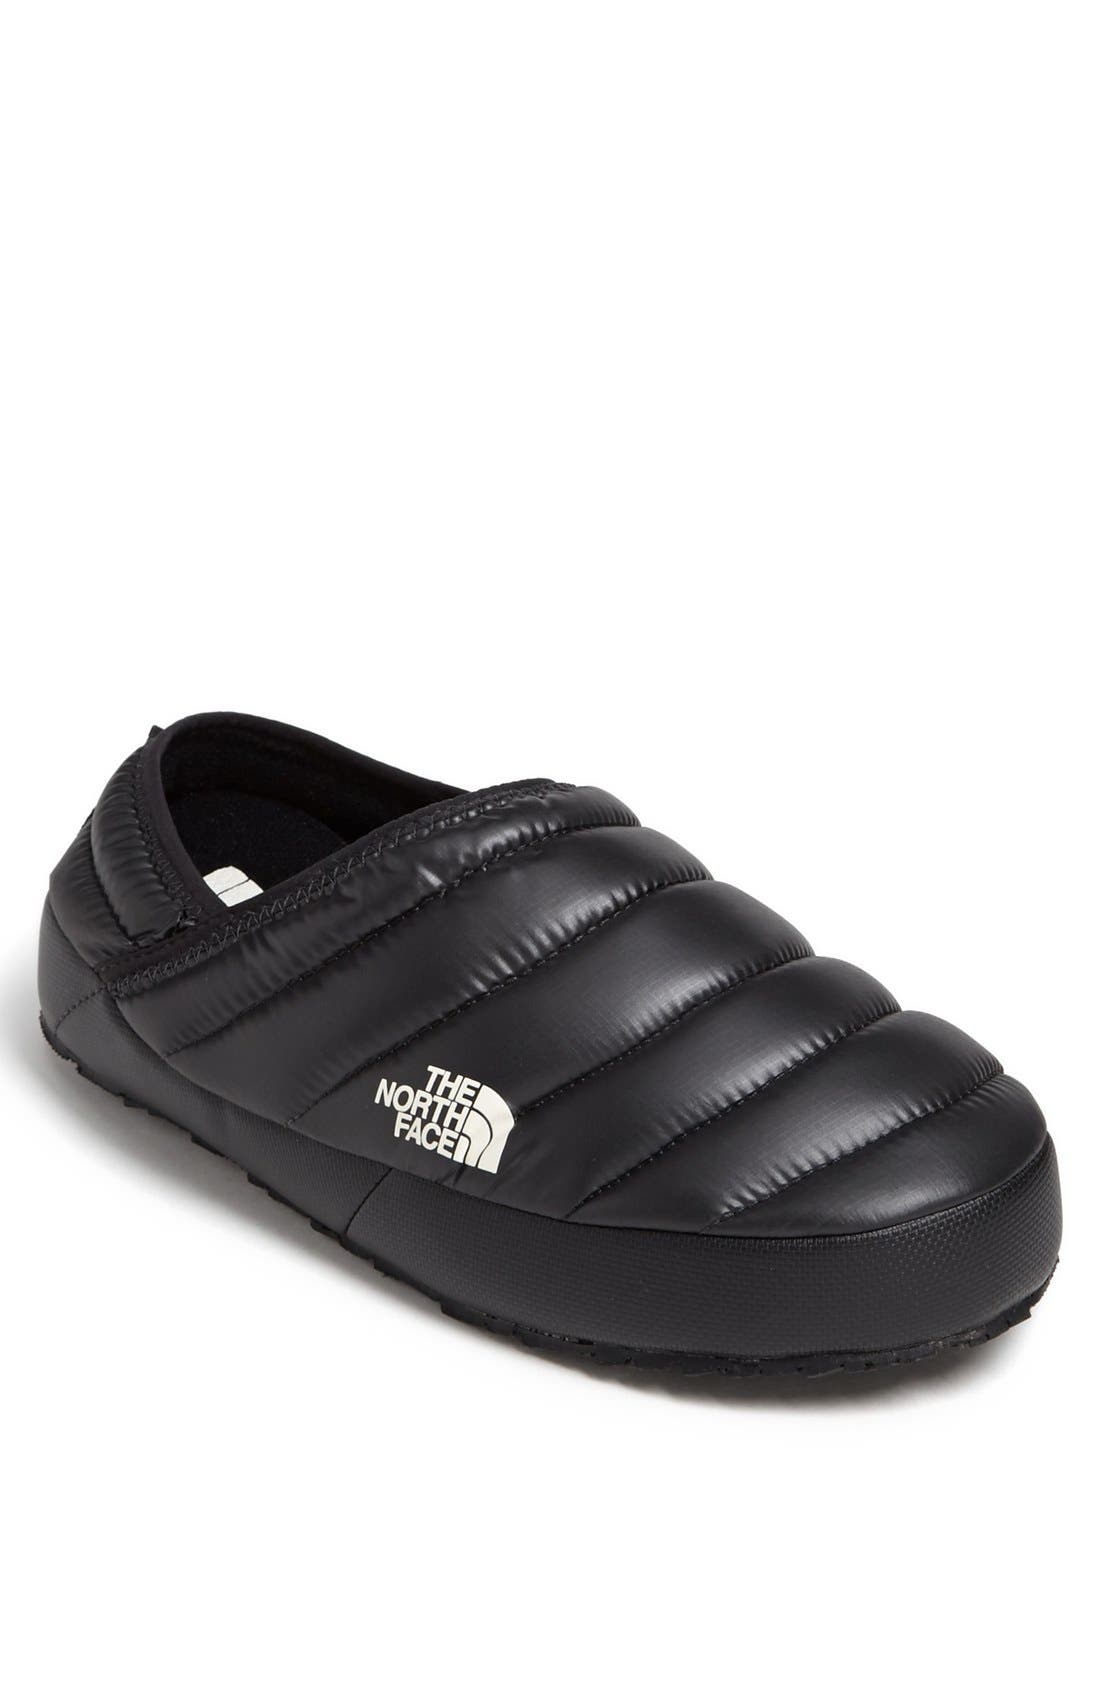 north face thermoball slippers 